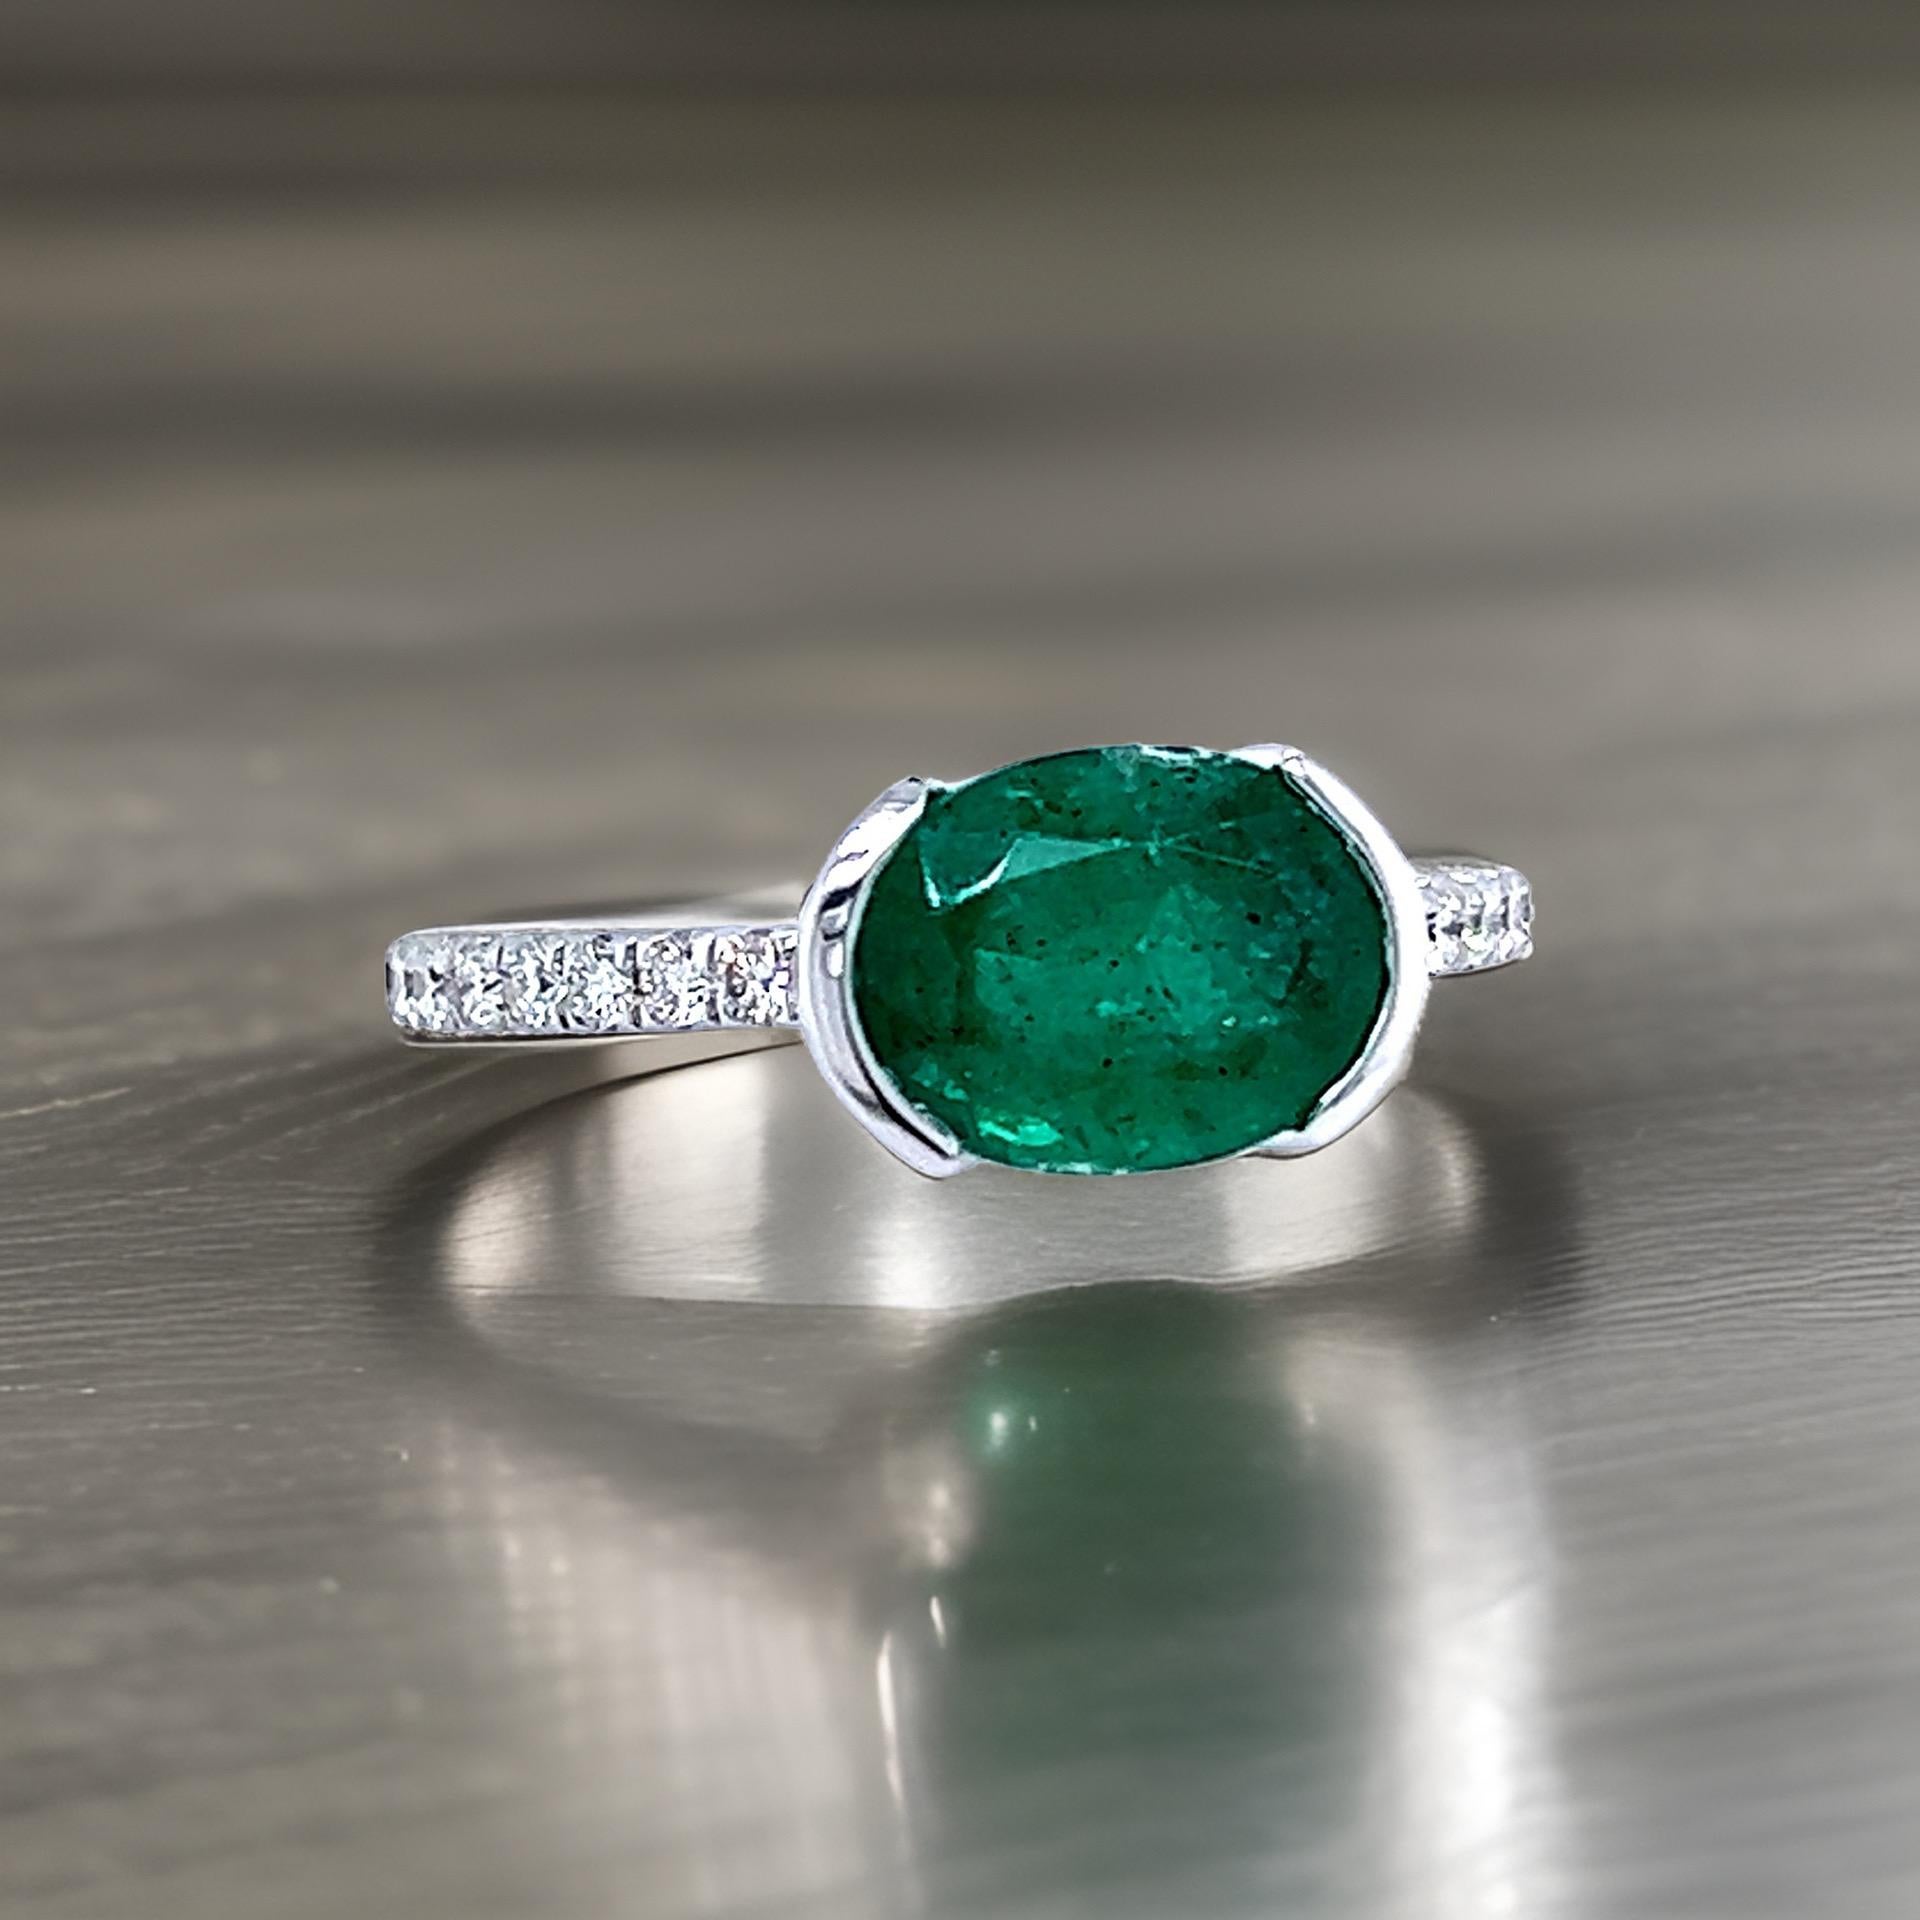 Oval Cut Natural Emerald Diamond Ring 6.5 14k W Gold 2.33 TCW Certified For Sale